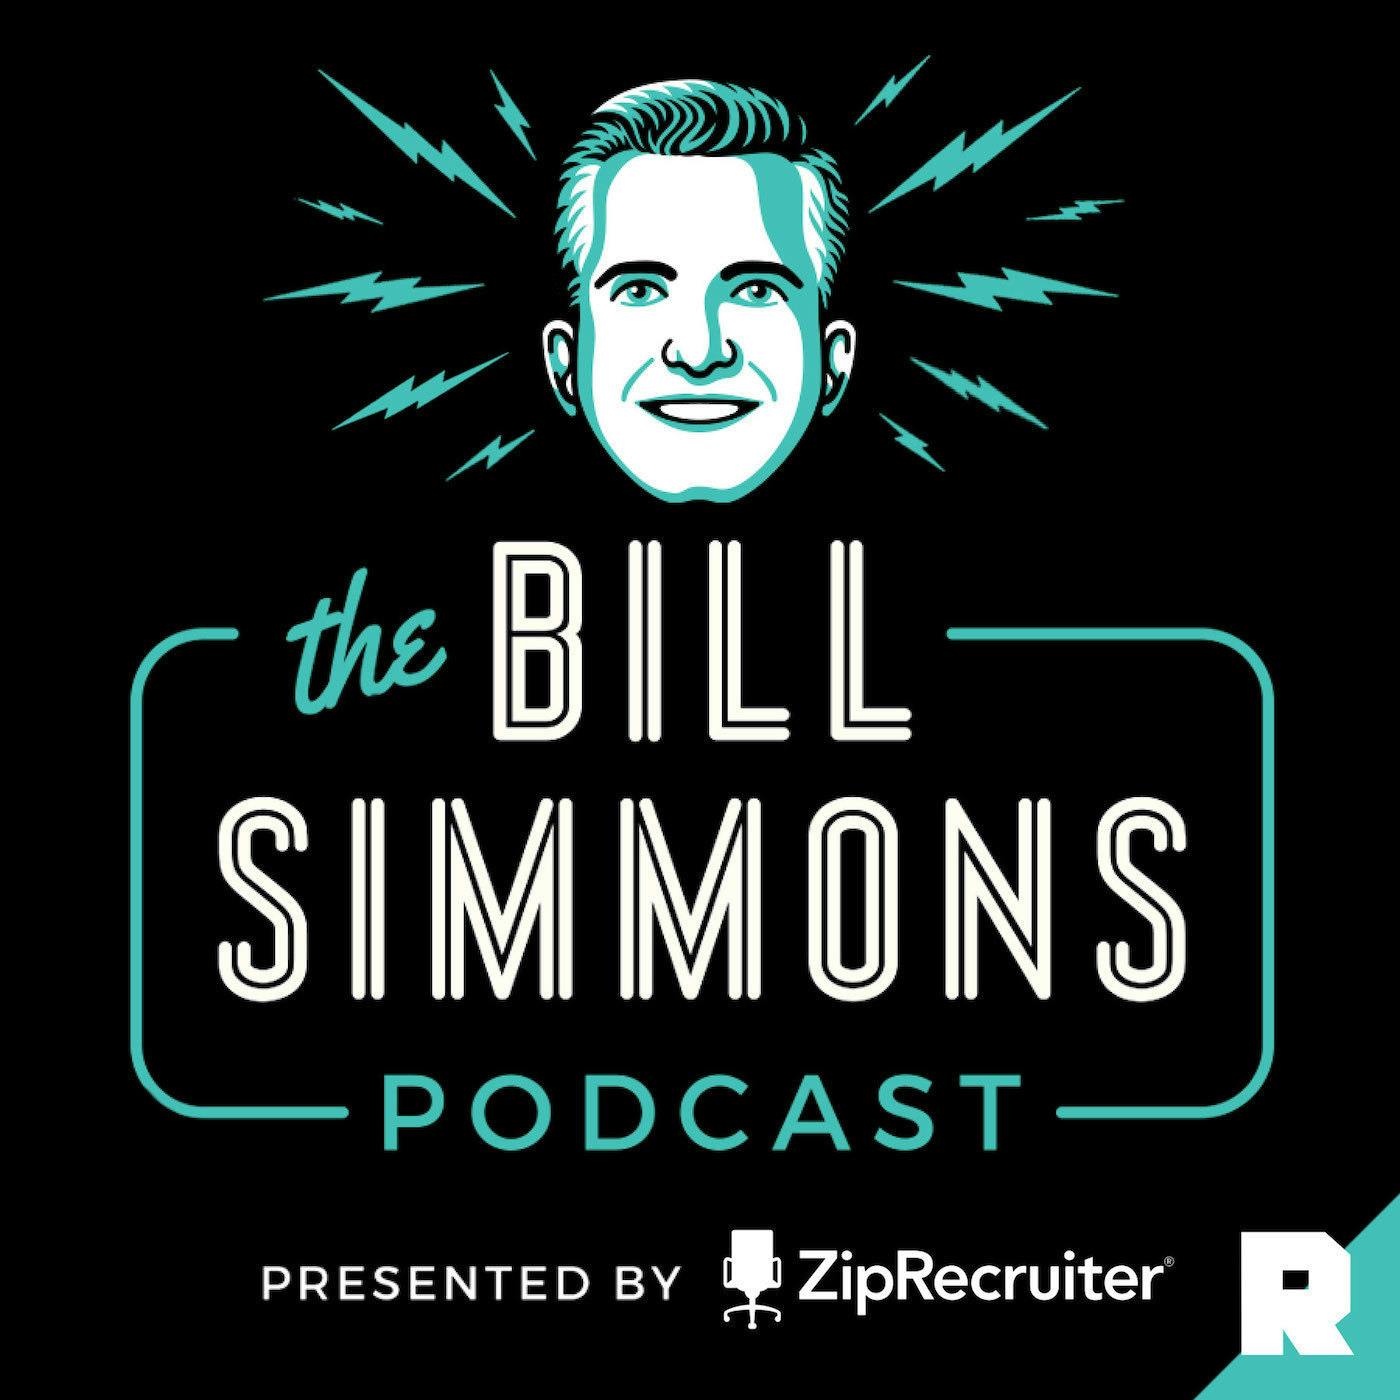 Matt Damon on ’Good Will Hunting,’ ’Rounders’ and Breaking Into ’90s Hollywood | The Bill Simmons Podcast (Ep. 423)